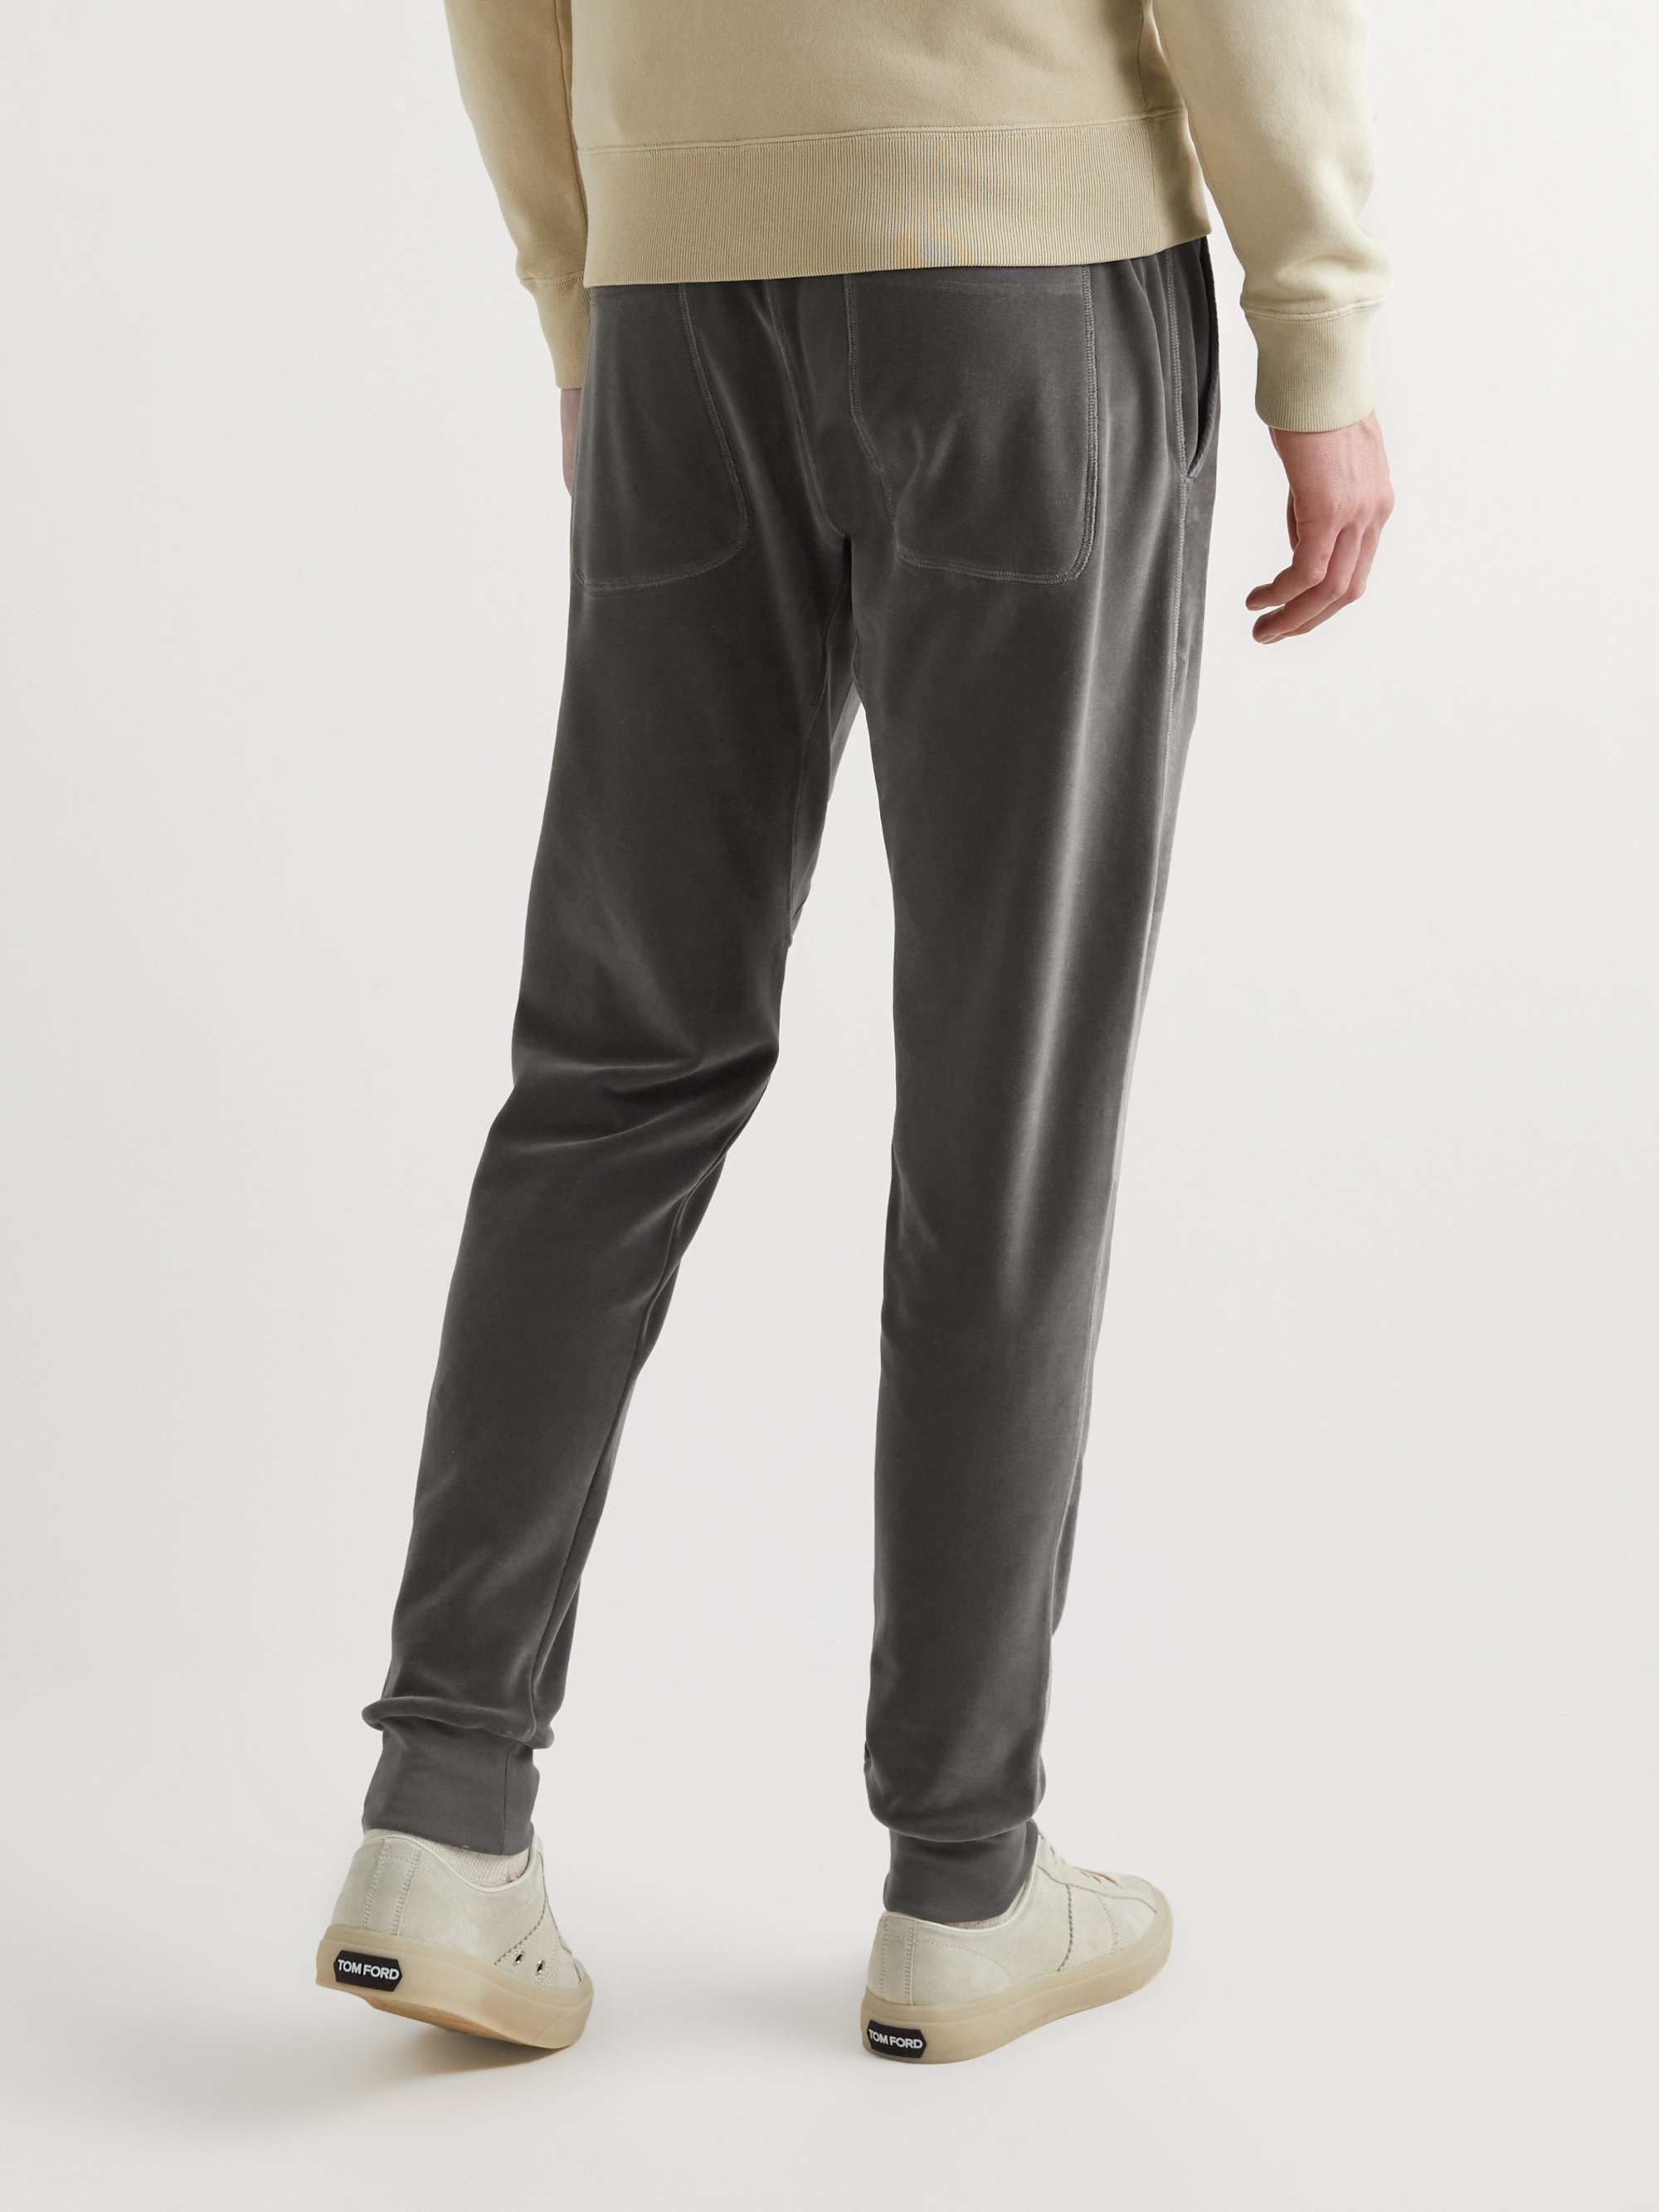 TOM FORD Tapered Cotton-Blend Velour Sweatpants